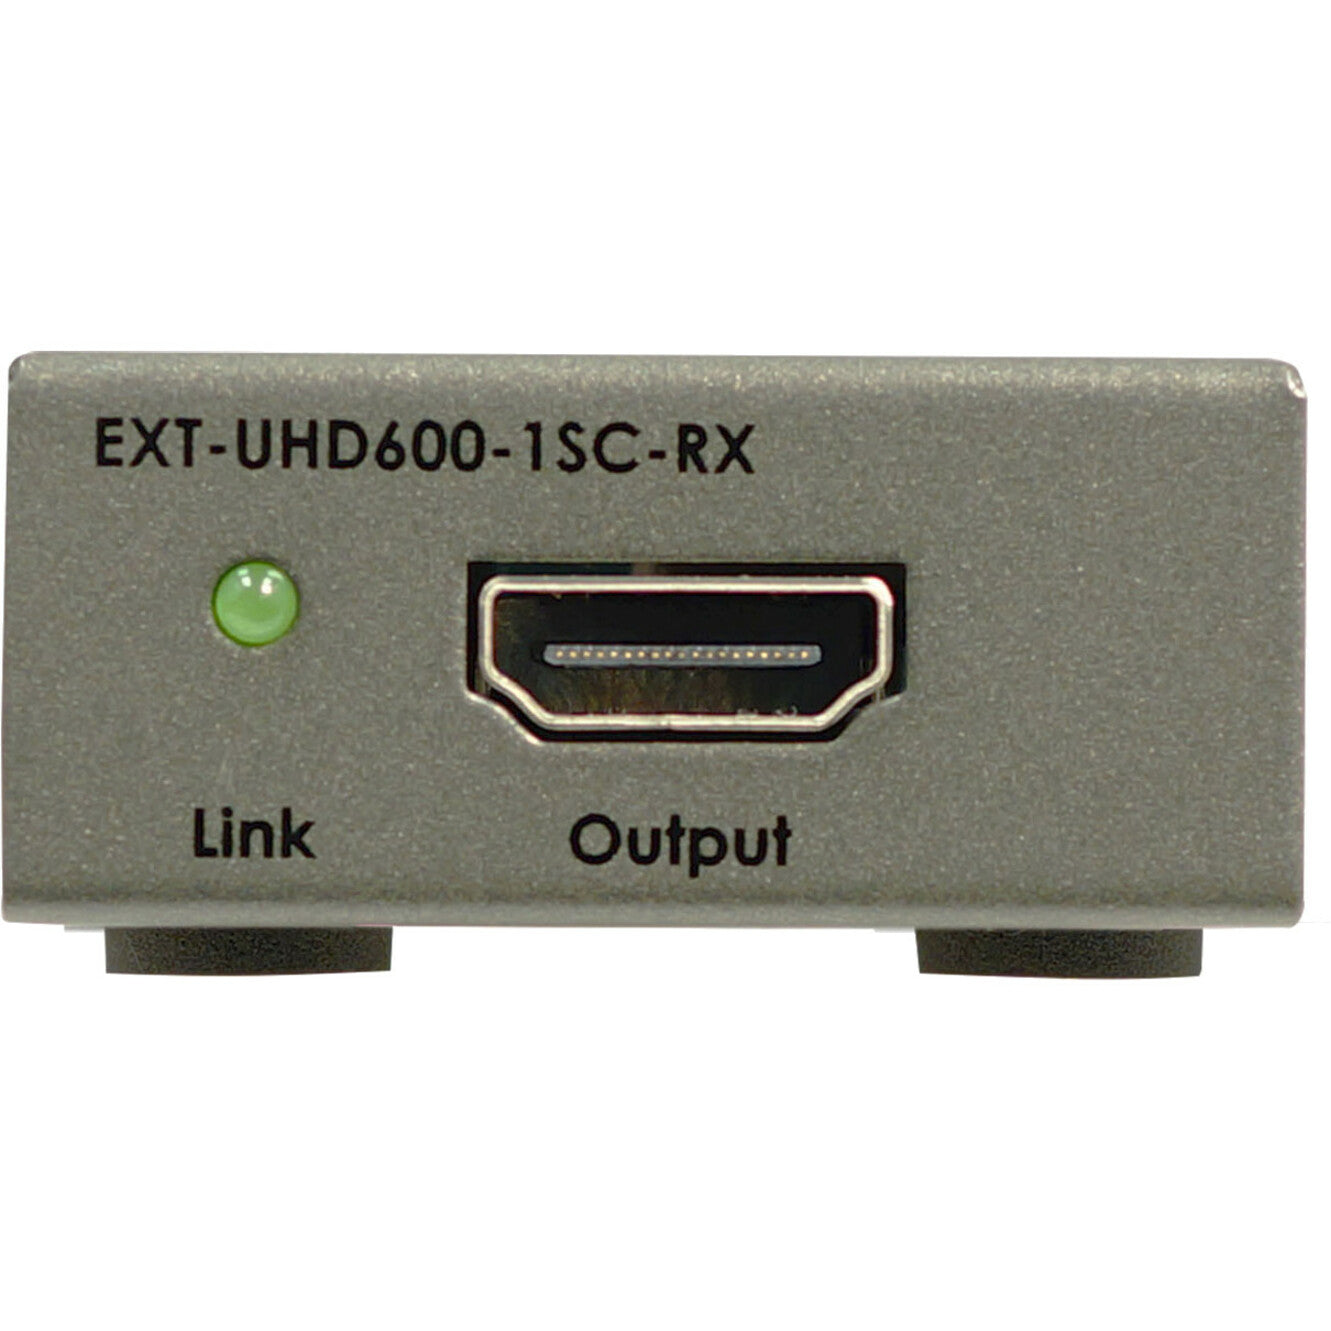 Gefen EXT-UHD600-1SC 4K Ultra HD 600 MHz Extender For HDMI Over One Fiber-Optic Cable, Uncompressed Audio/Video, HDR, 660ft Range